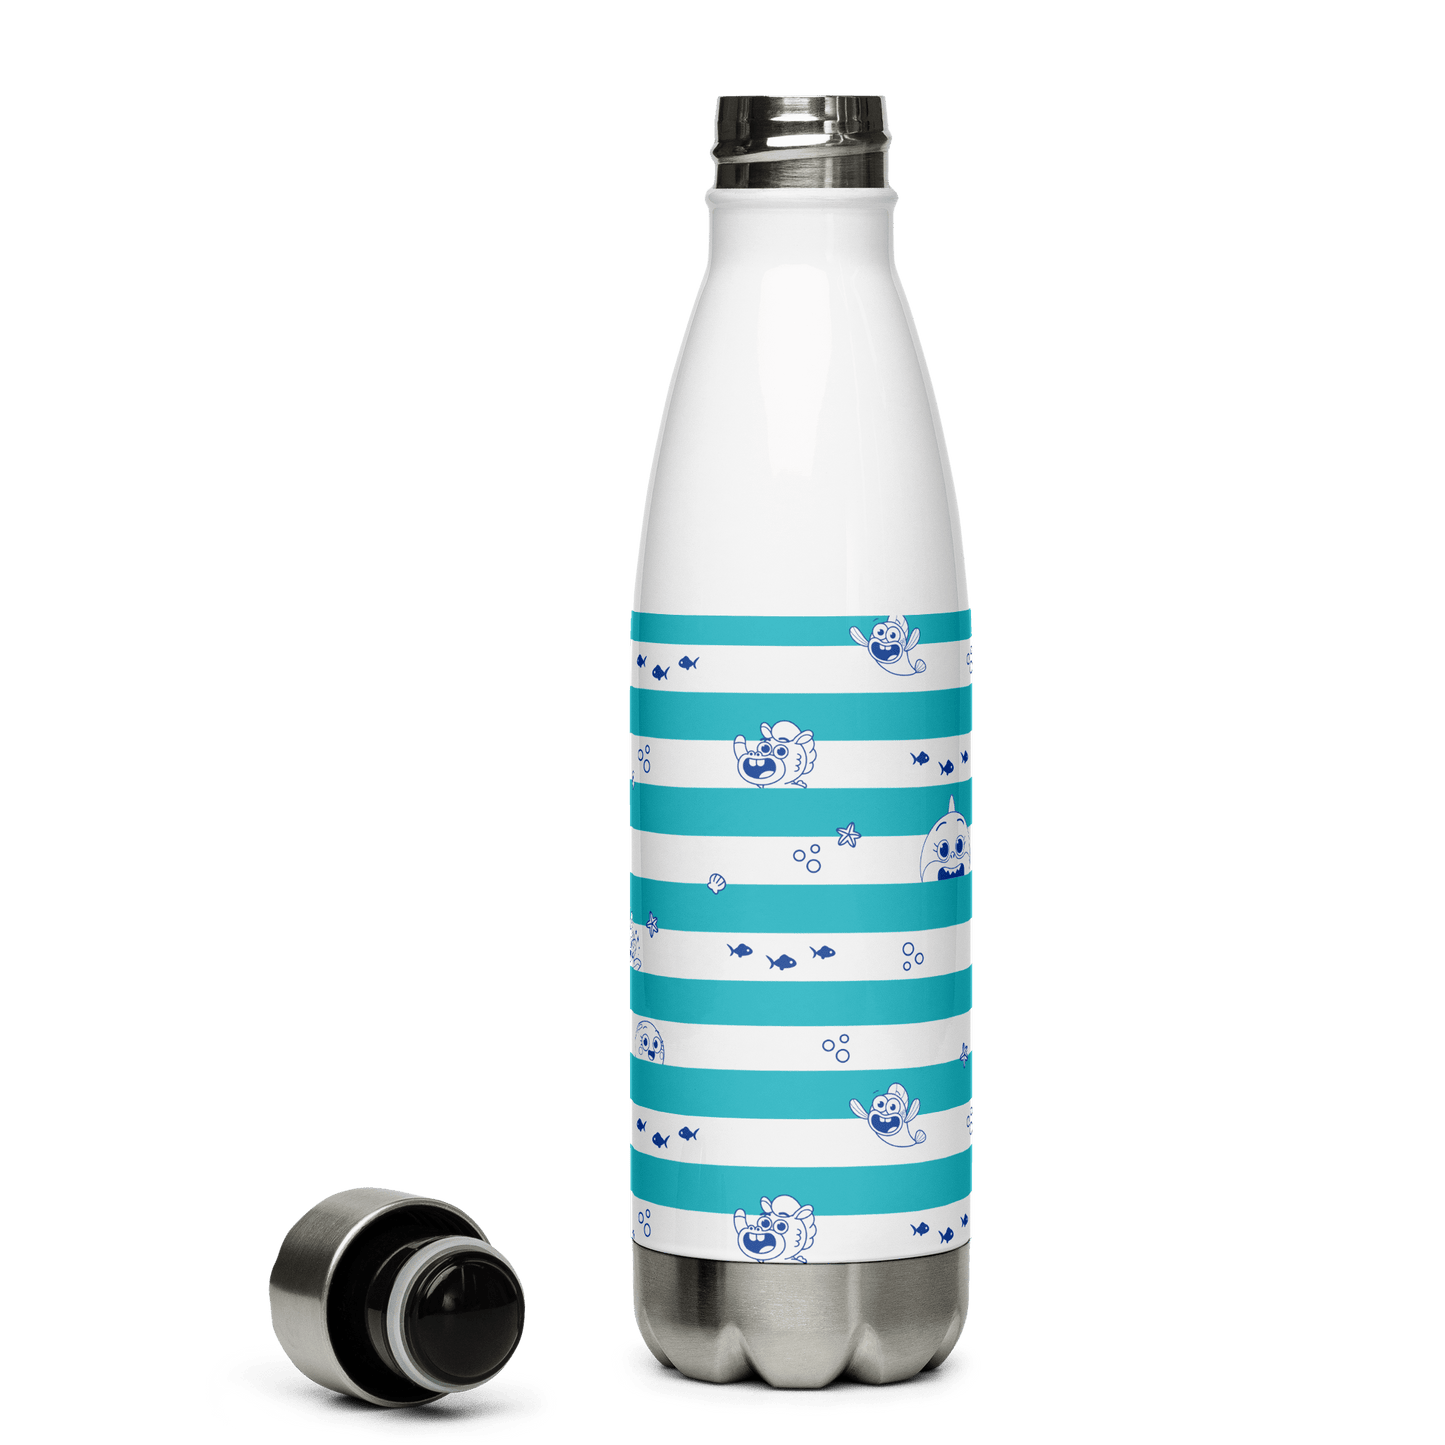 Baby Shark's Big Show Striped Stainless Steel Water Bottle - Paramount Shop